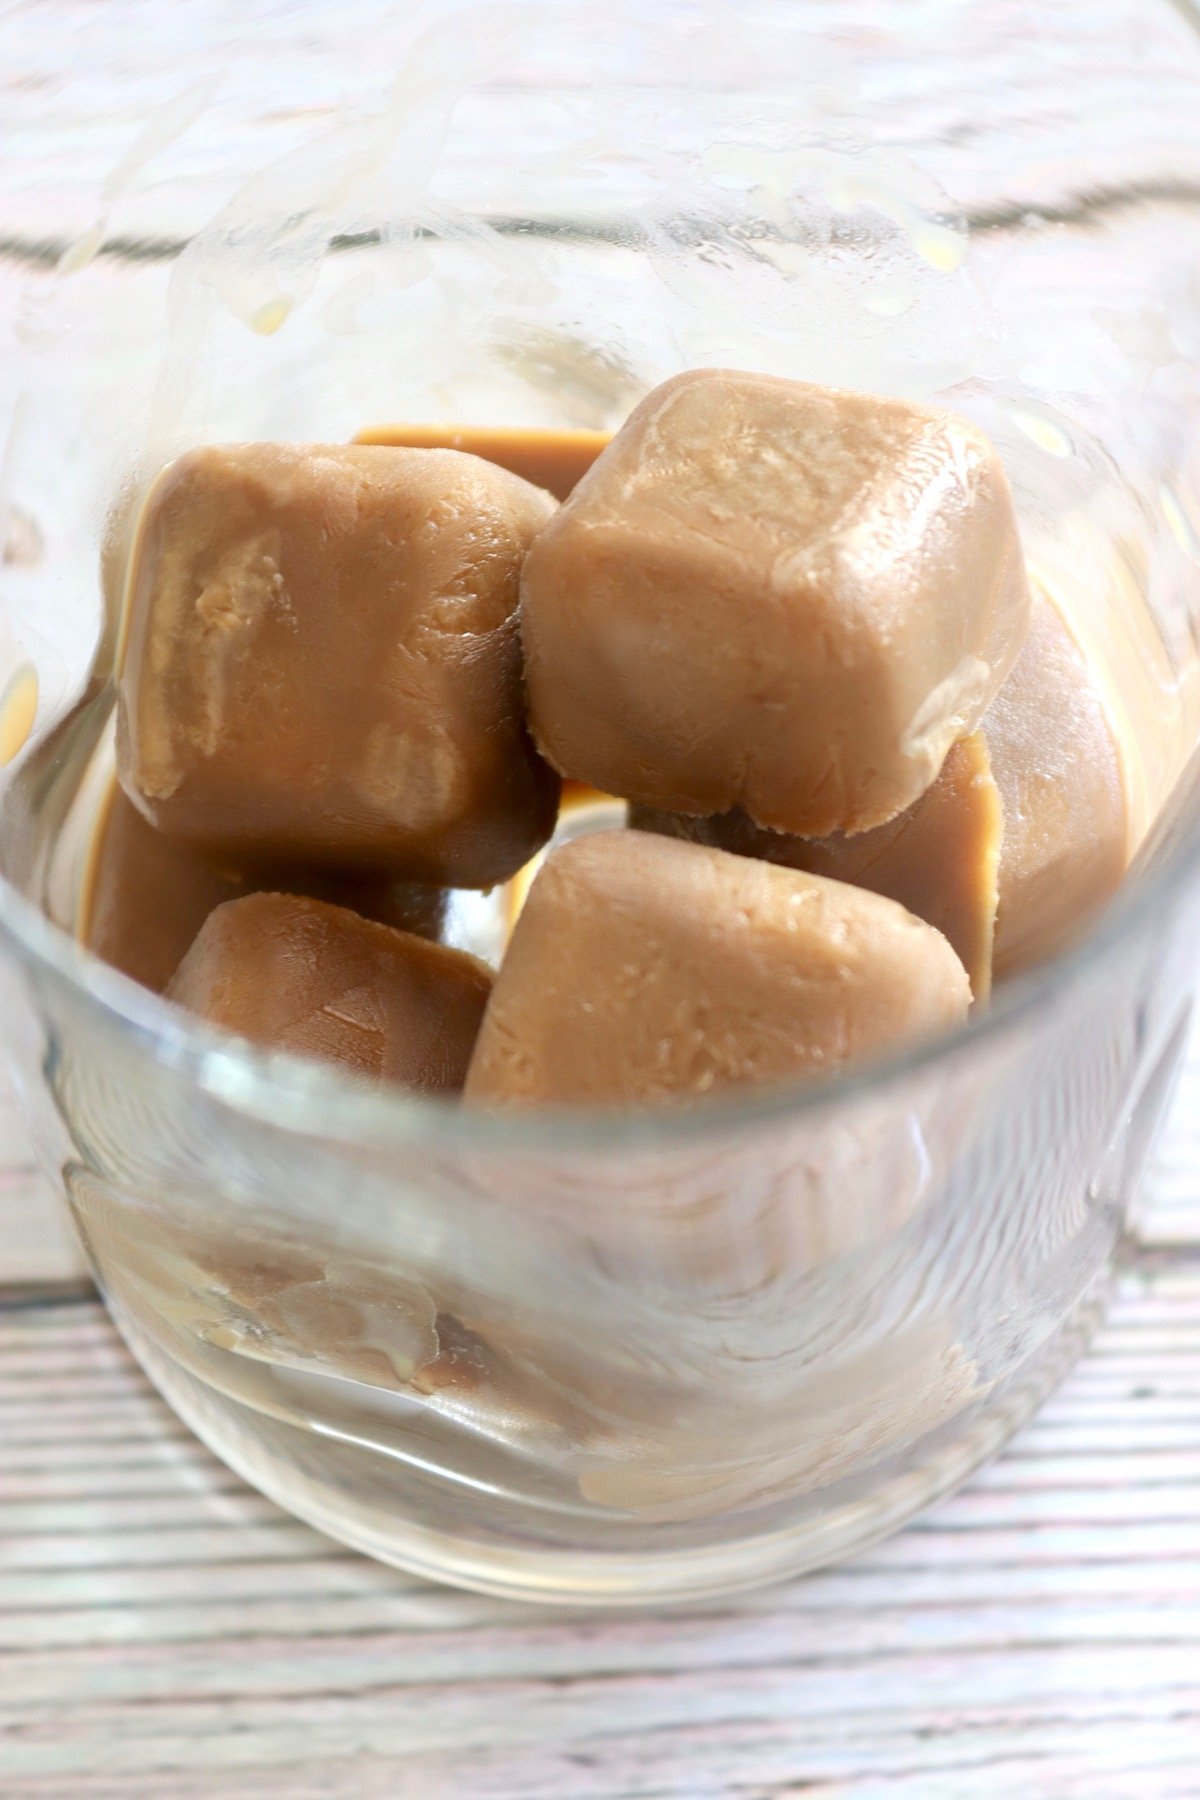 Clear drinking glass with several creamy coffee ice cubes in it.